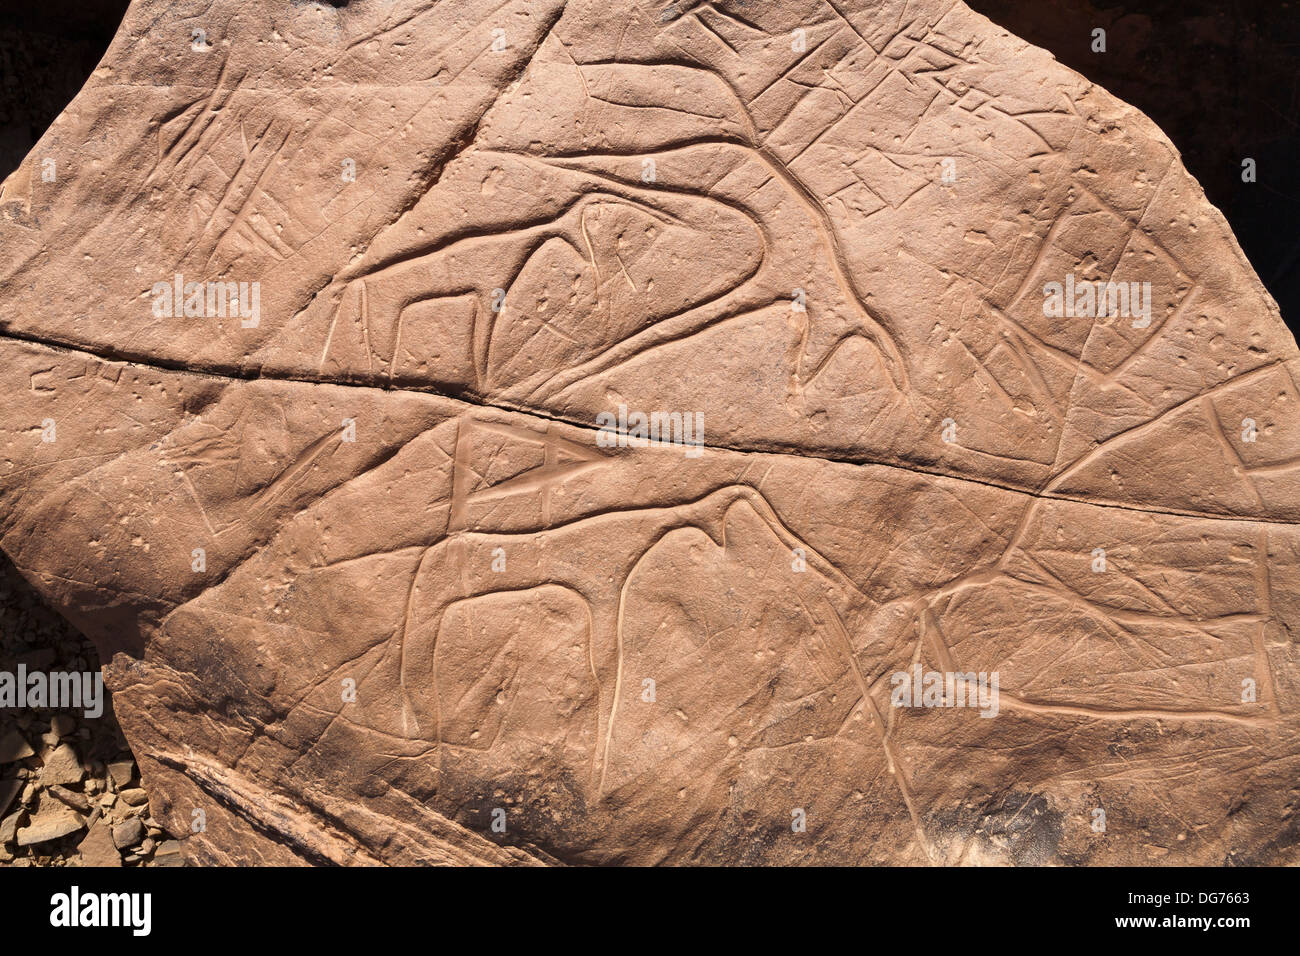 Prehistoric rock carvings at Aman Ighribin on the Tata to Akka road in Morocco Stock Photo